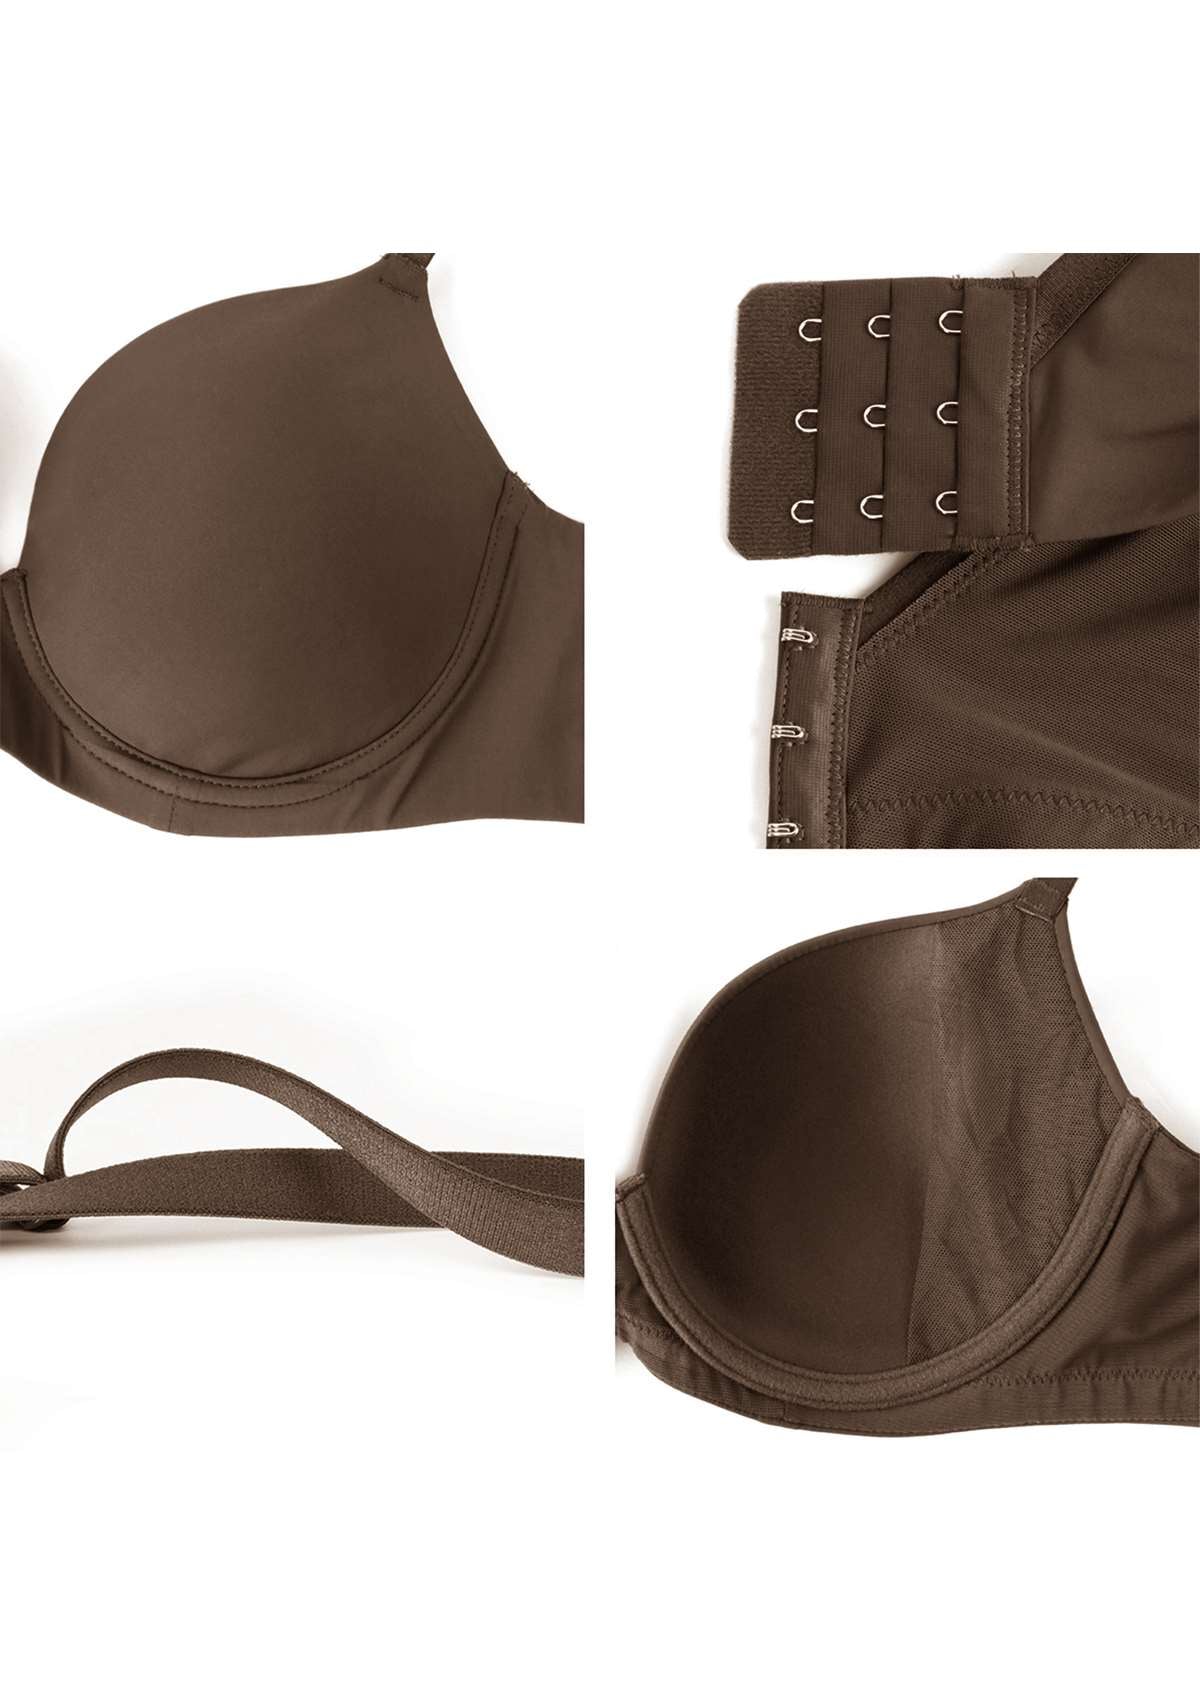 HSIA Gemma Smooth Supportive Padded T-shirt Bra - For Full Figures - Cocoa Brown / 36 / DDD/F